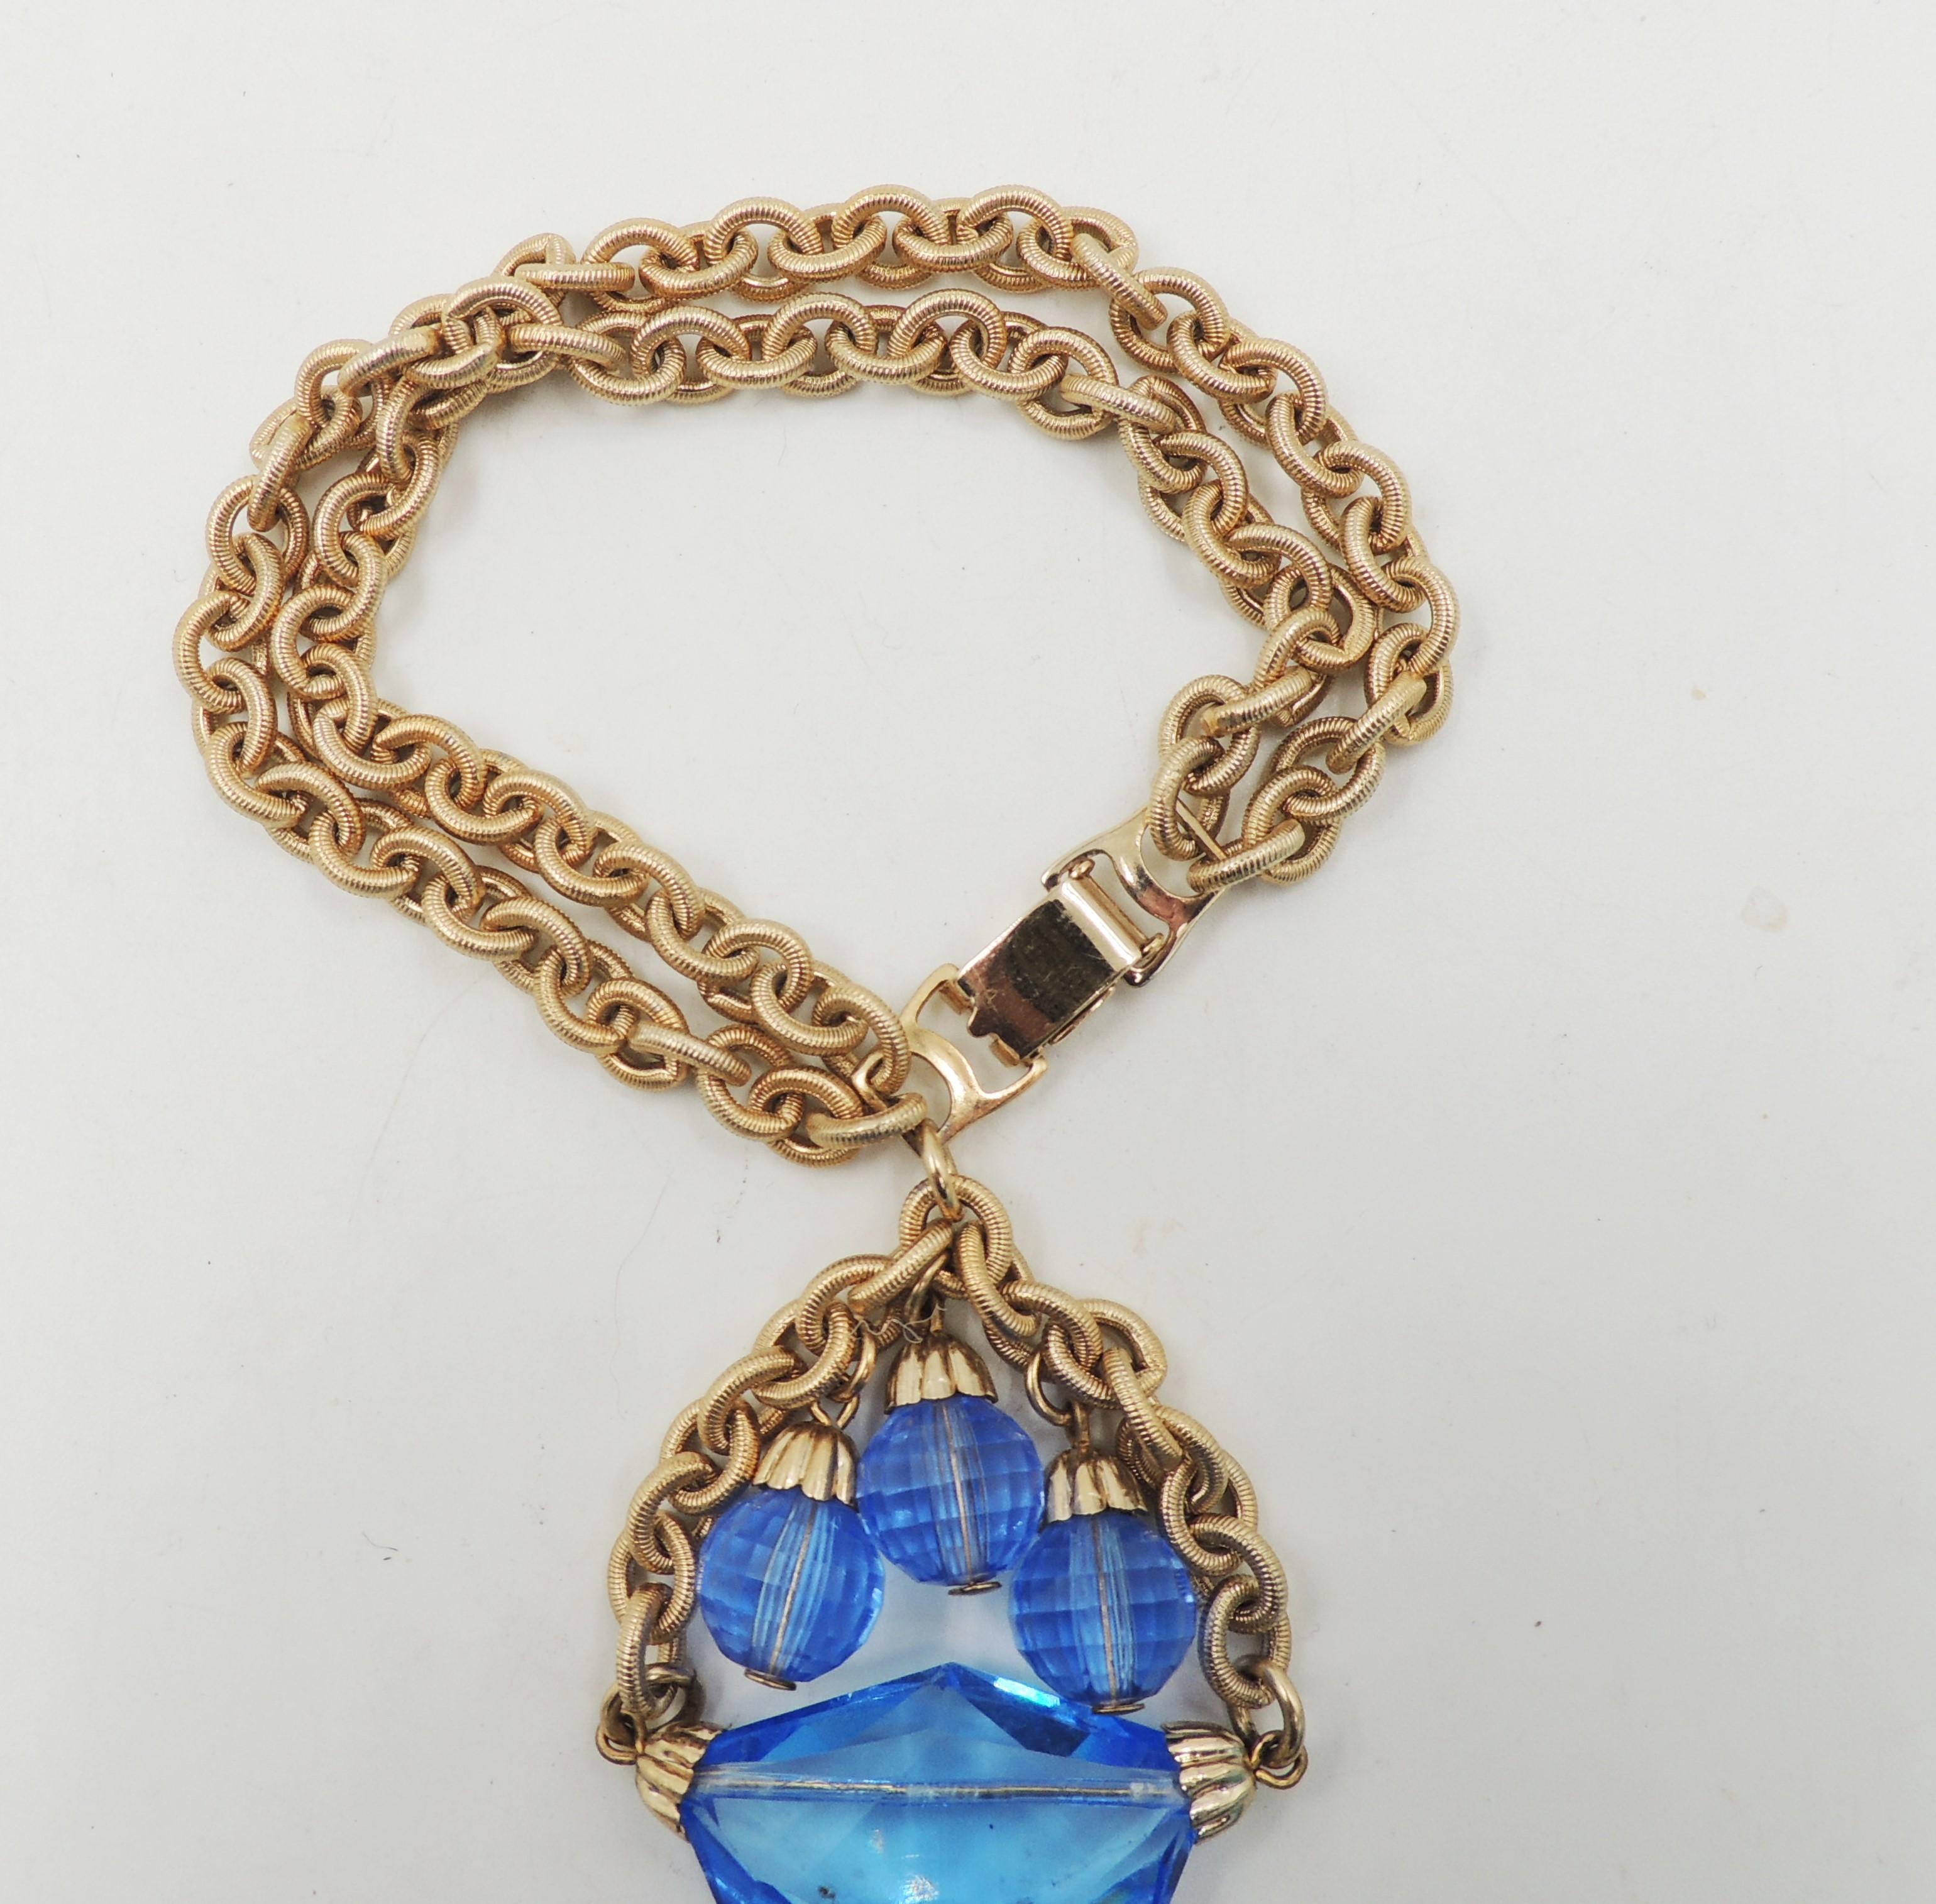 1950s goldtone cut blue glass with three faceted resin beads charm bracelet with fold over clasp. Marked 